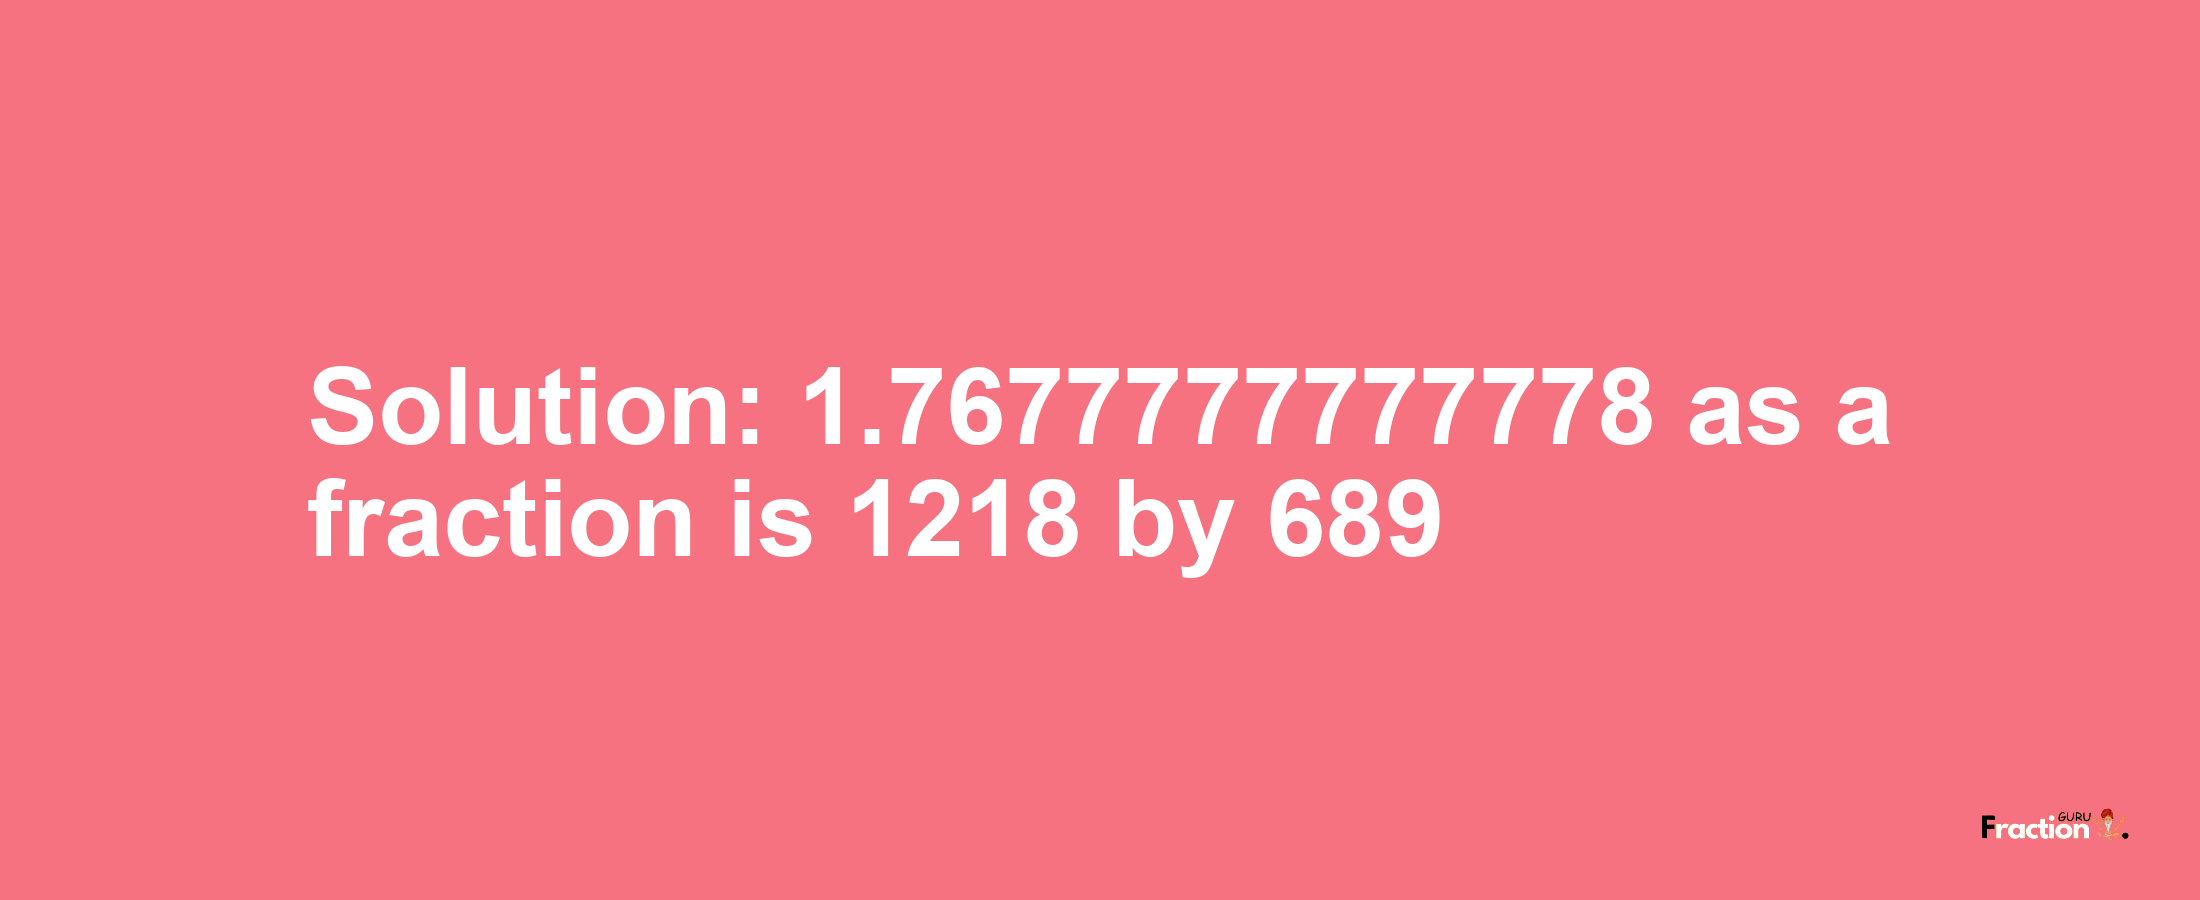 Solution:1.7677777777778 as a fraction is 1218/689